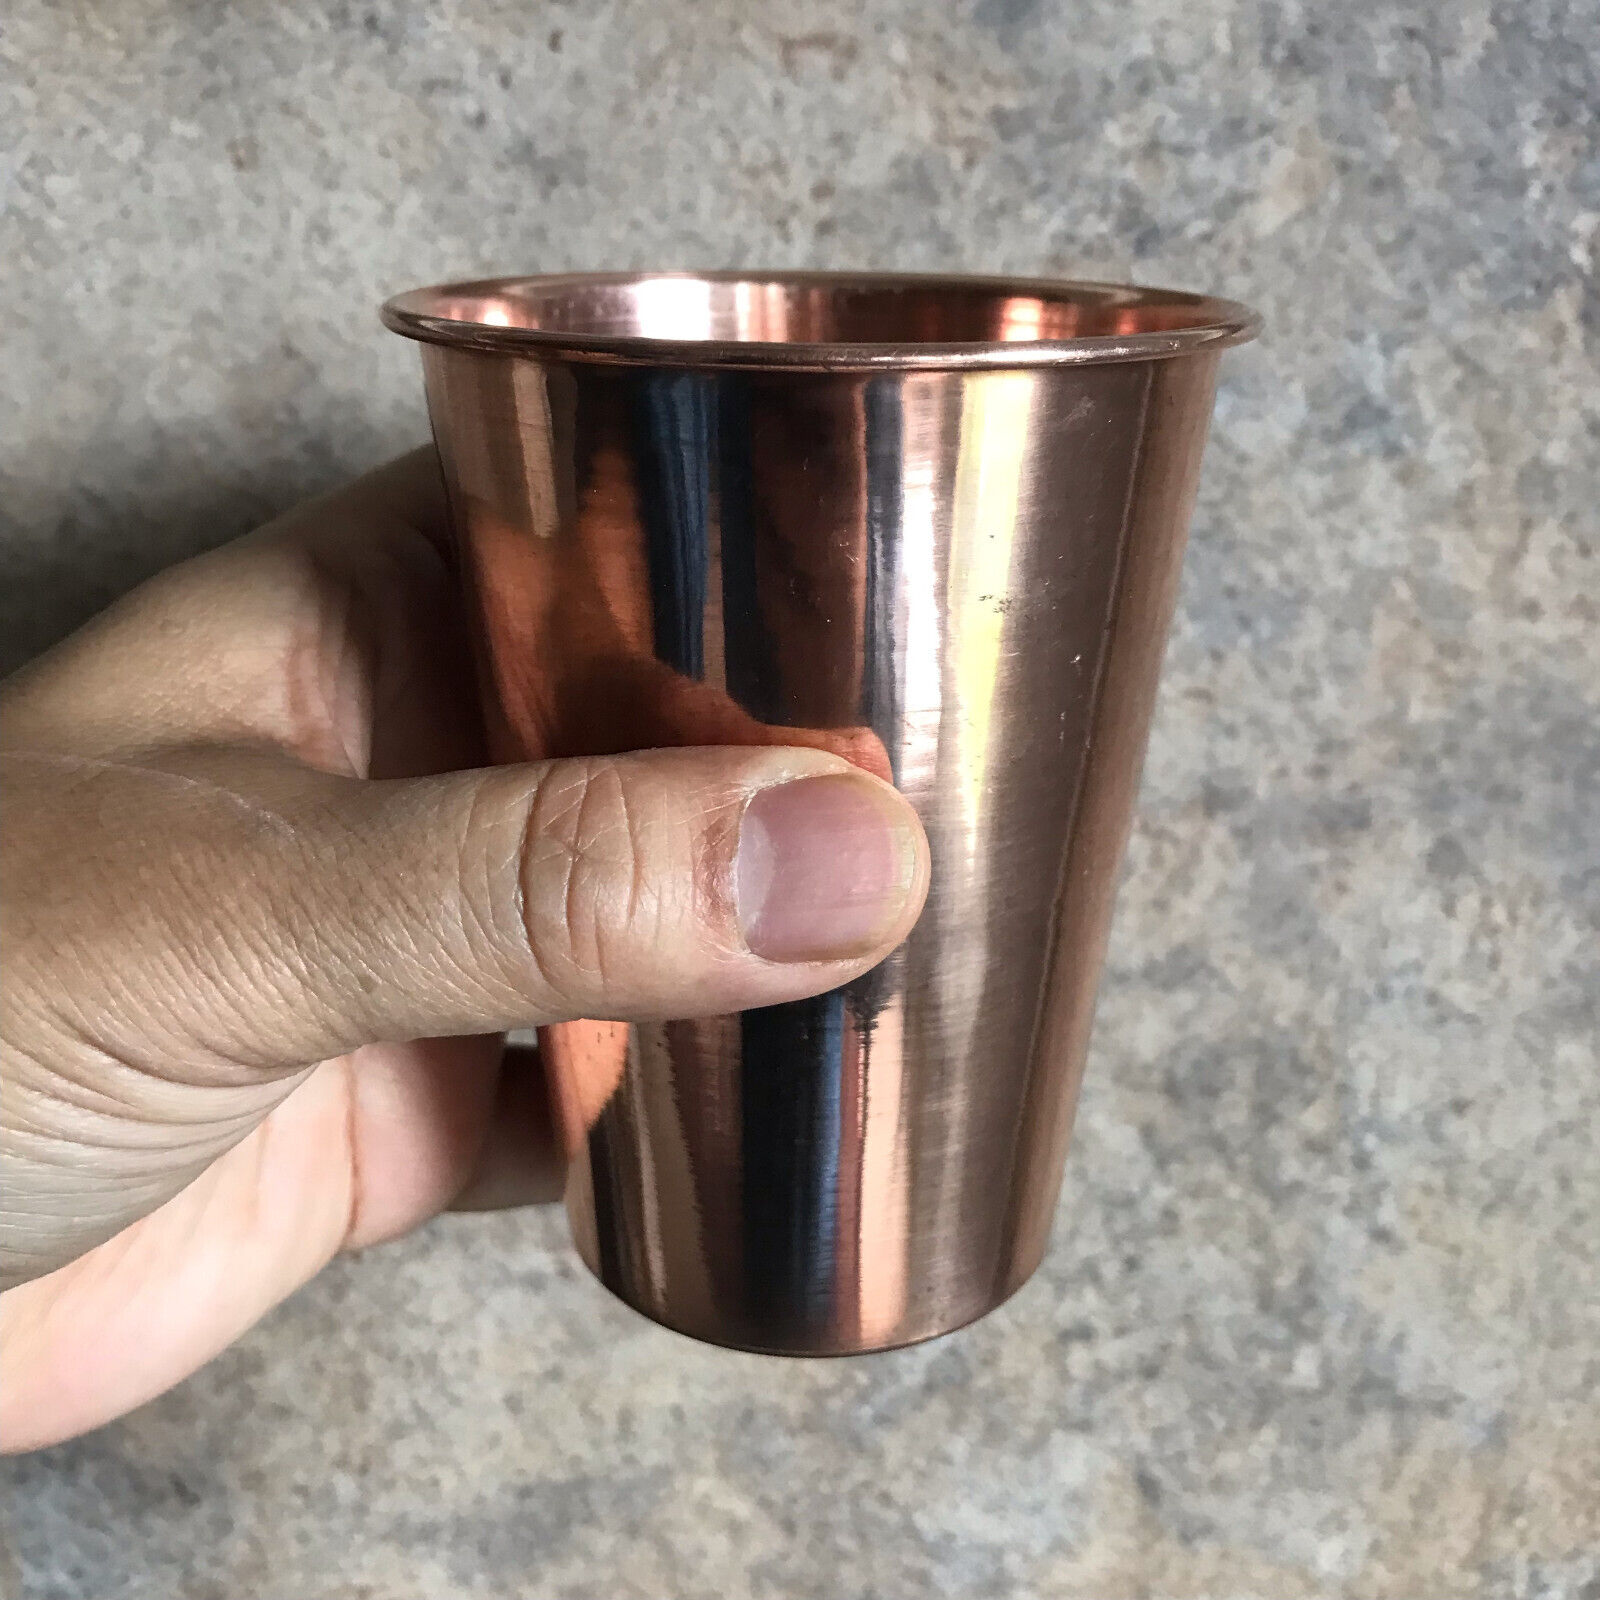 2 Quantity Cup Genuine Copper Water Drink Mug Pure Solid ship from USA to USA